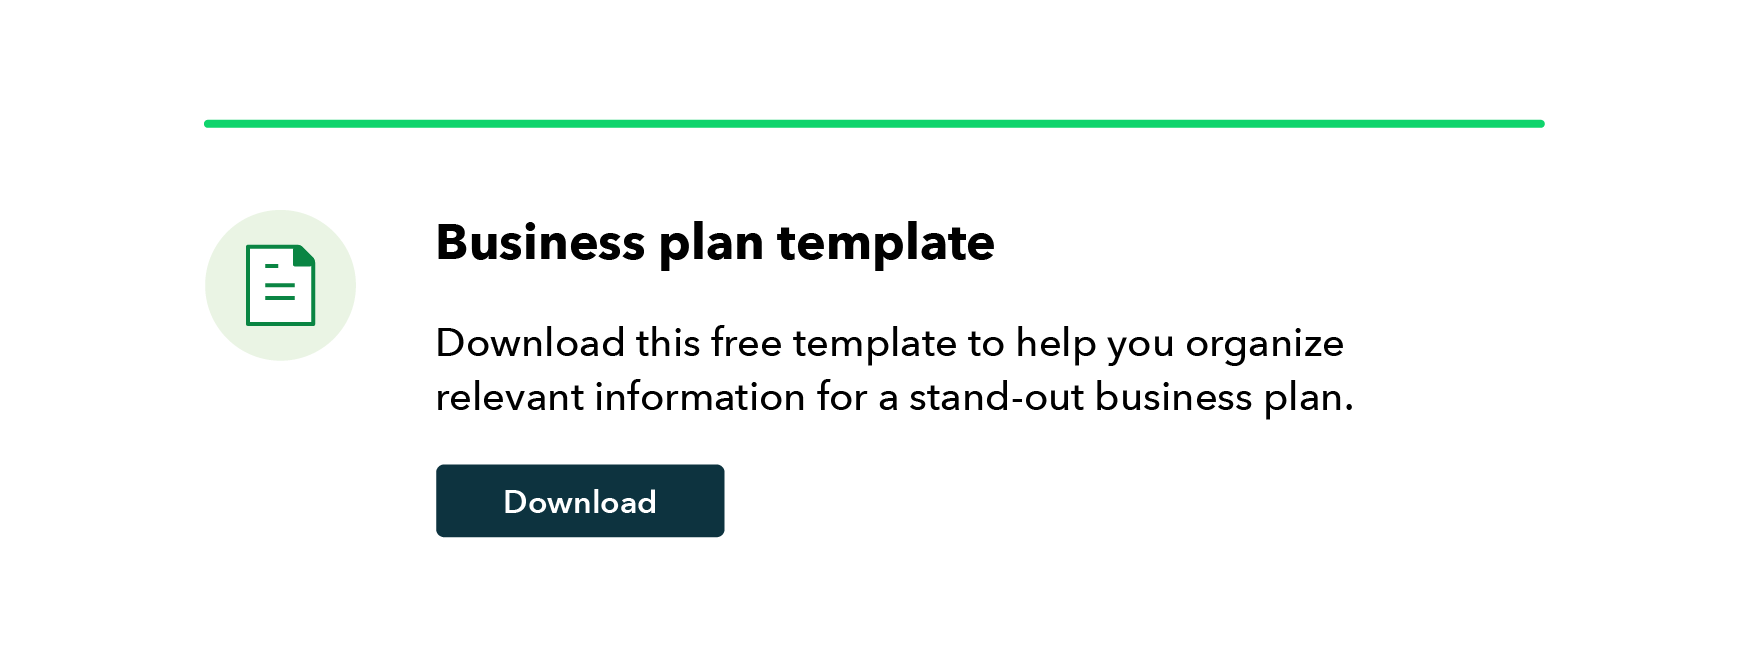 Business plan template download